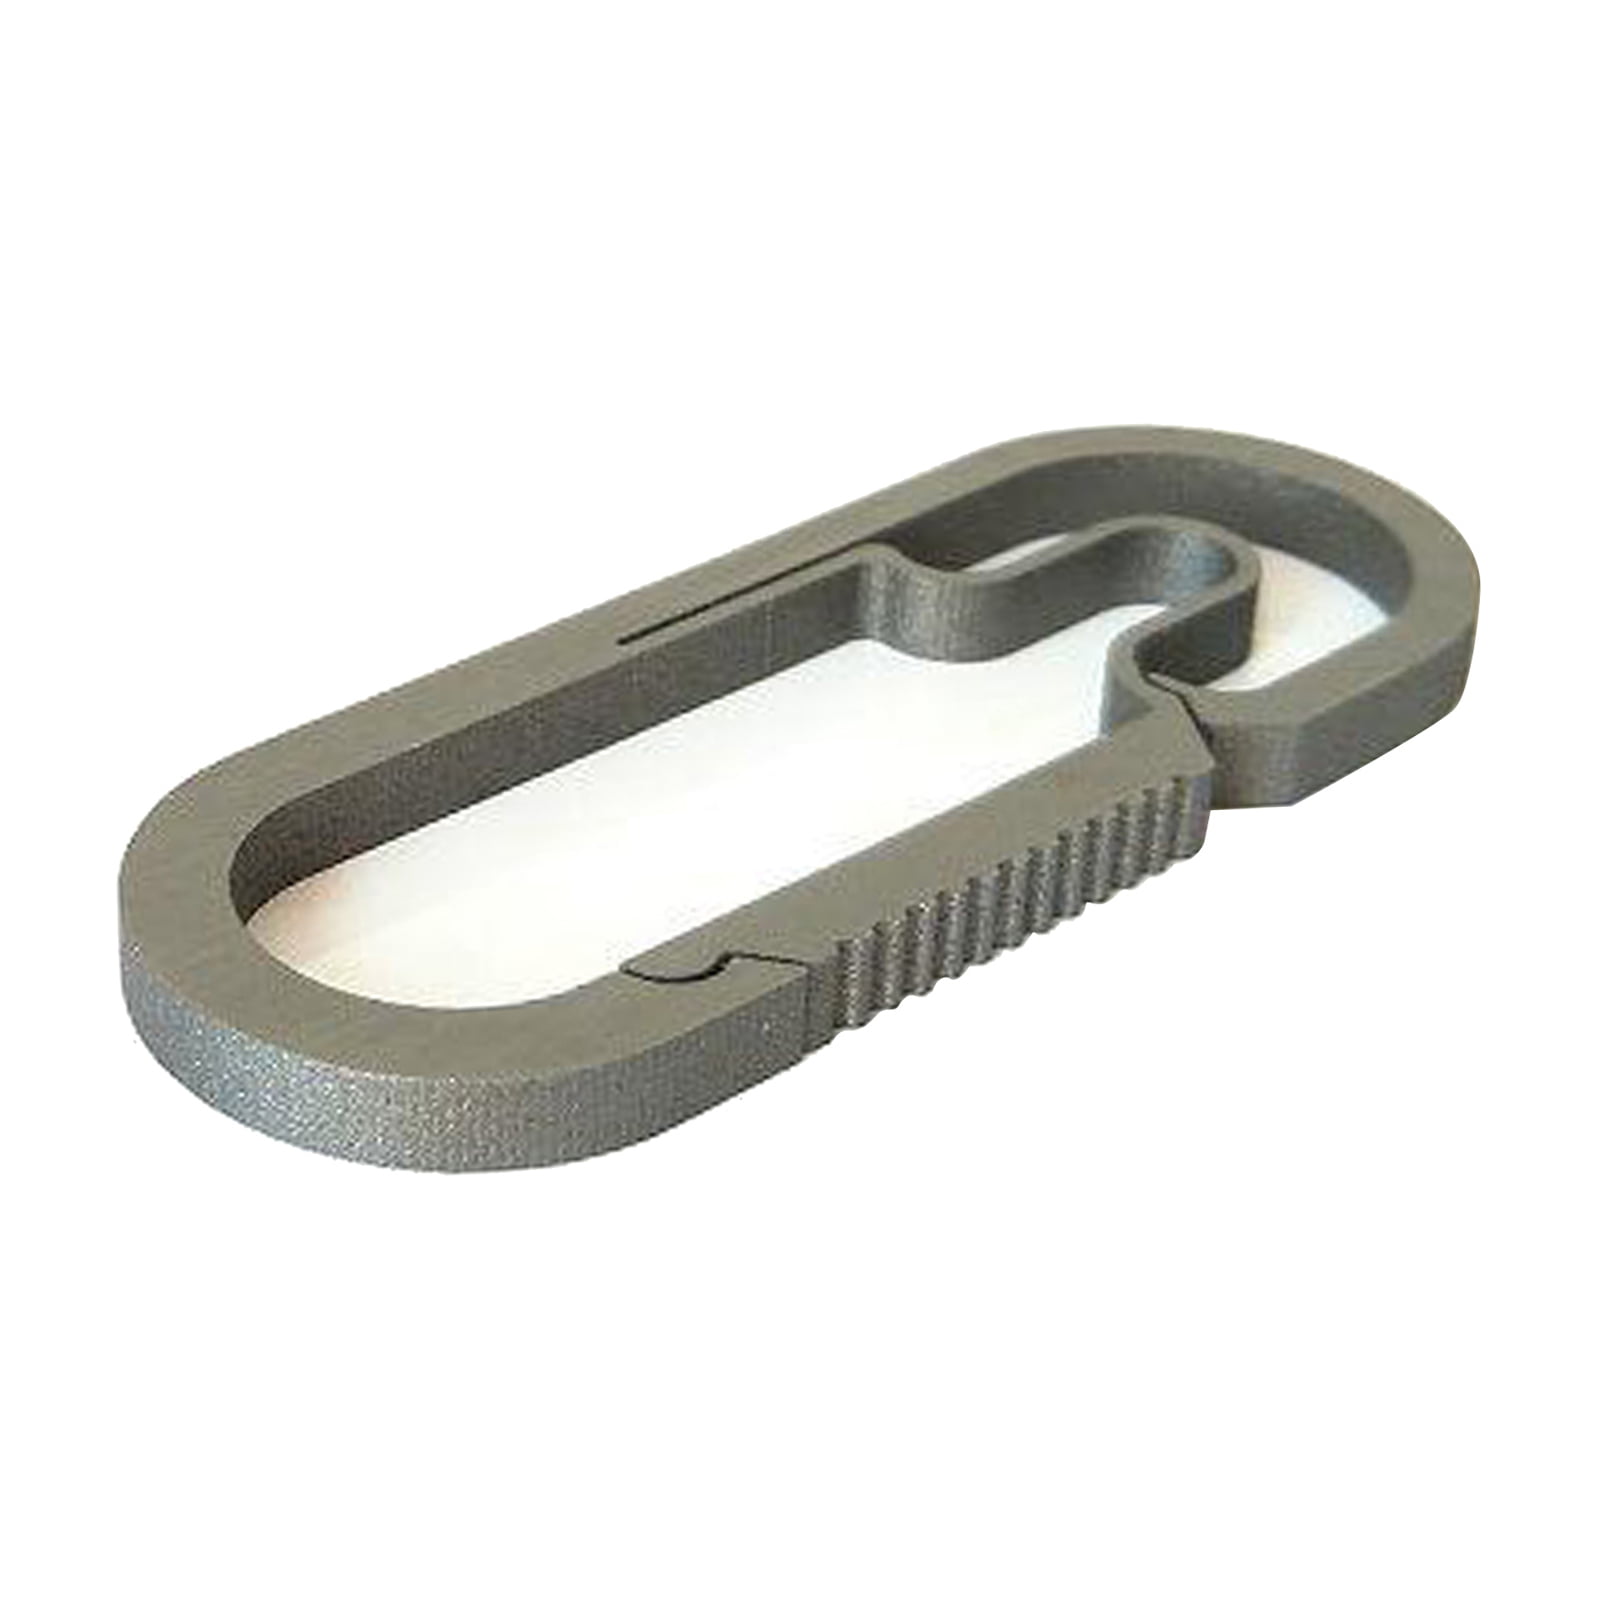 Titanium Alloy Carabiner Spring Snap Hook Clip KeyChain Quick Release Buckle 